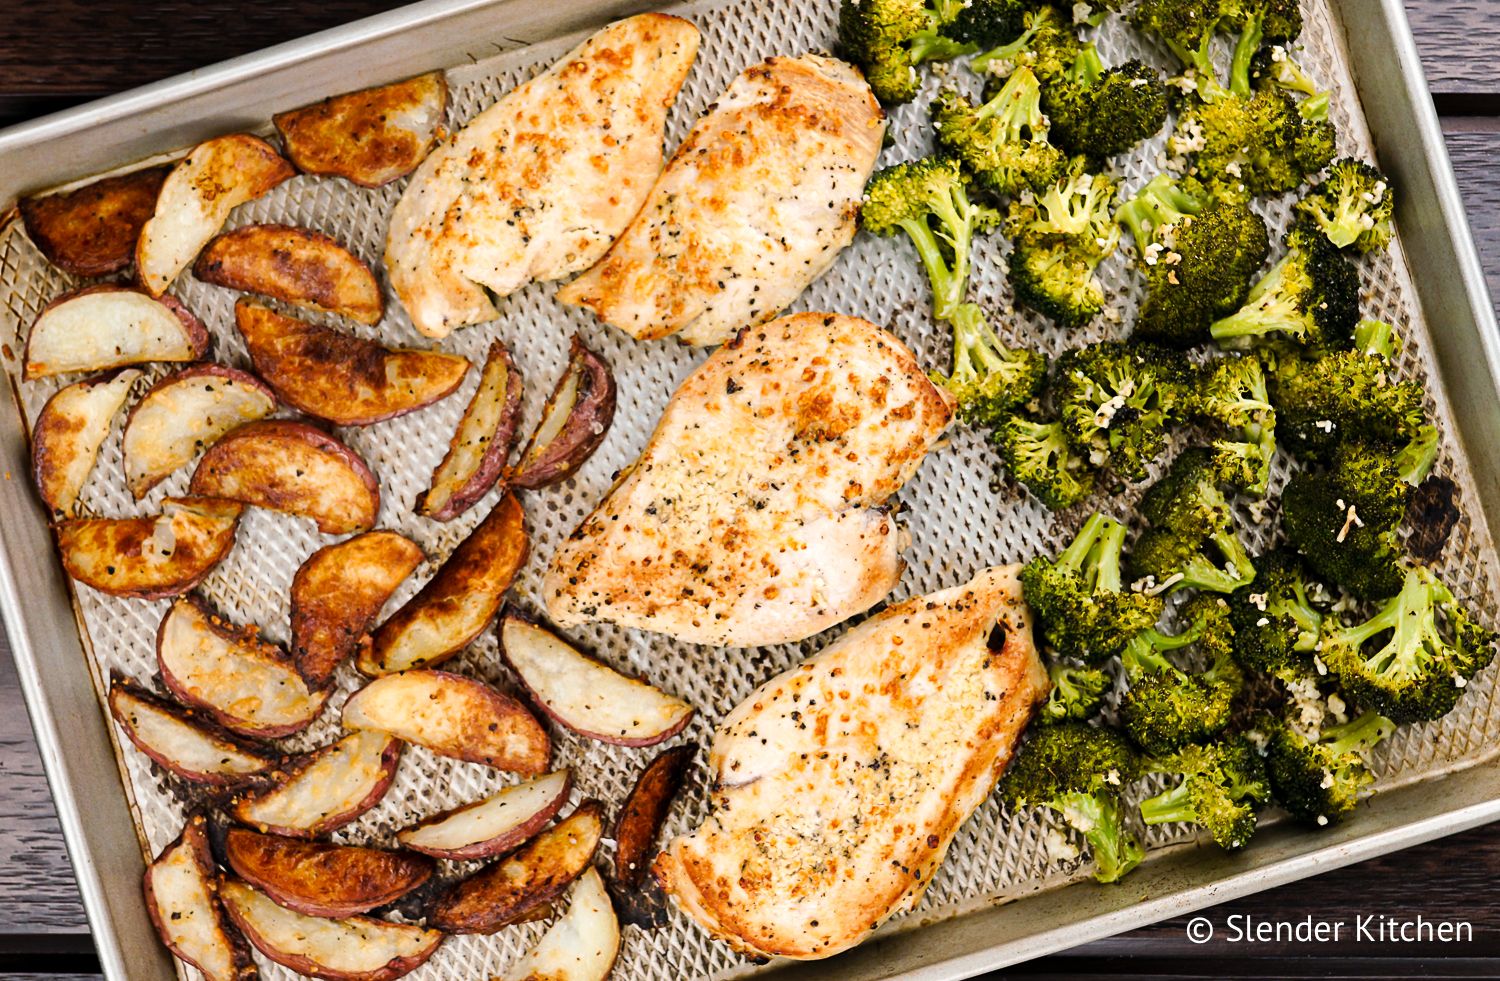 Roasted broccoli, potatoes, and chicken on a sheet pan.